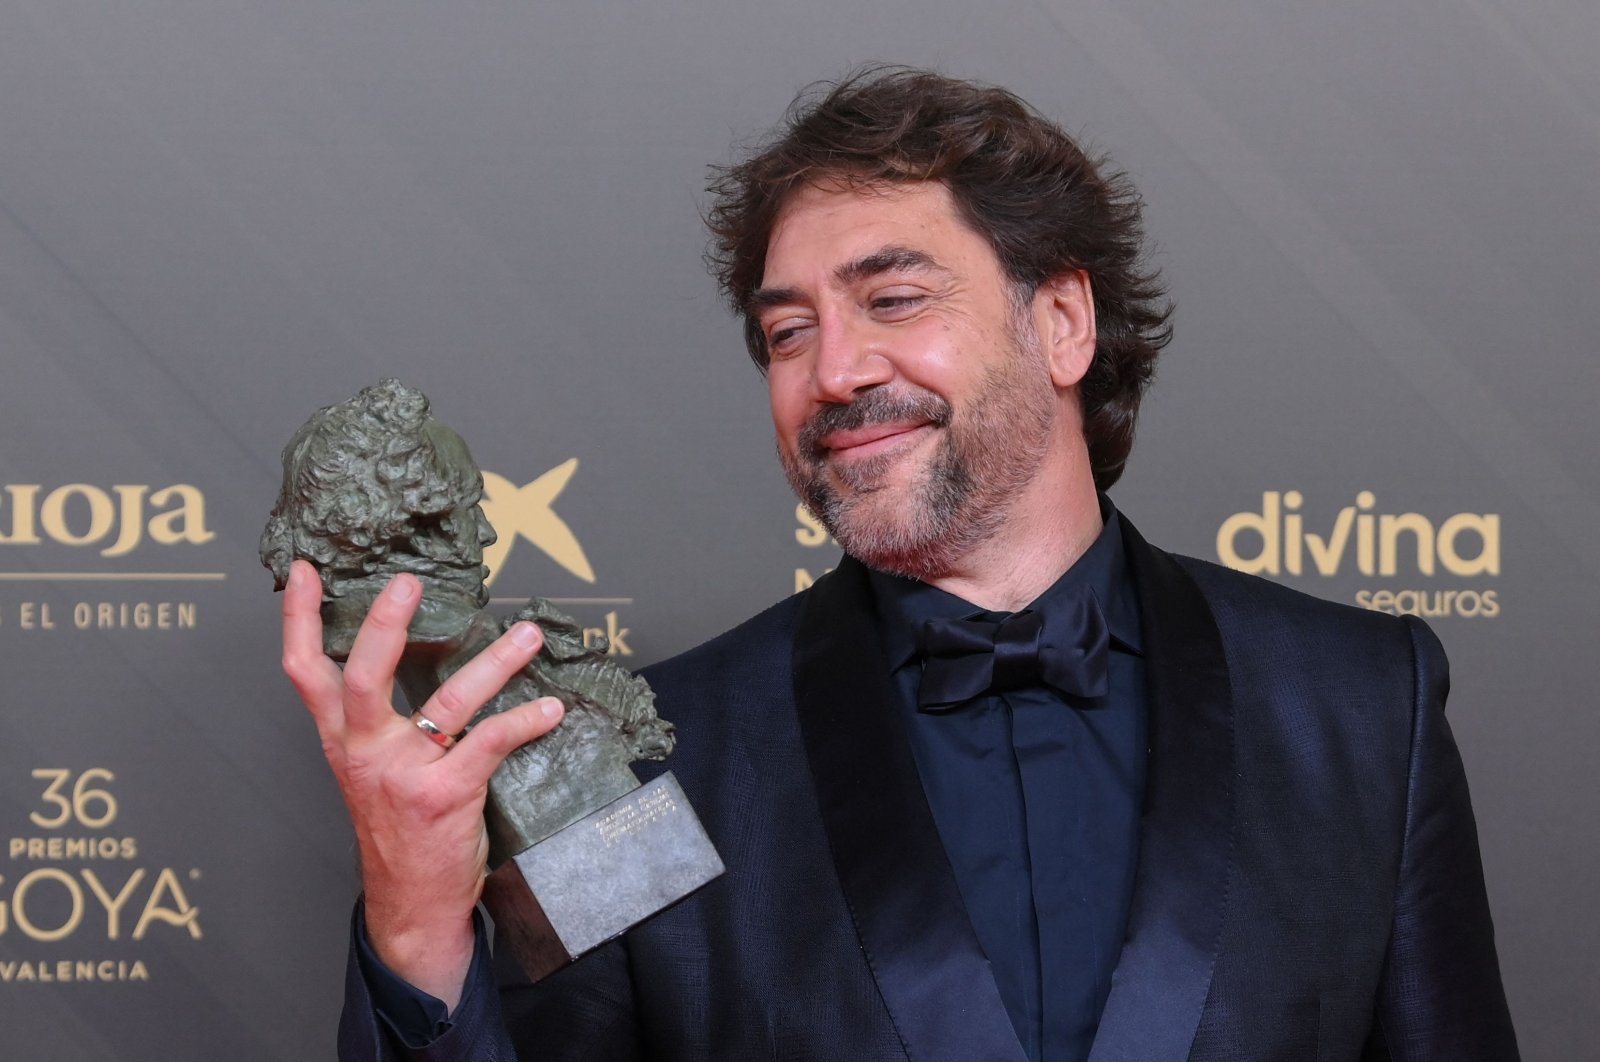 Spanish actor Javier Bardem poses with the Goya award for best actor in &quot;El buen patron&quot; (&quot;The Good Boss&quot;) during a photocall following the 36th Goya awards ceremony at the Palau de les Arts in Valencia, Spain, Feb. 12, 2022. (AFP Photo)